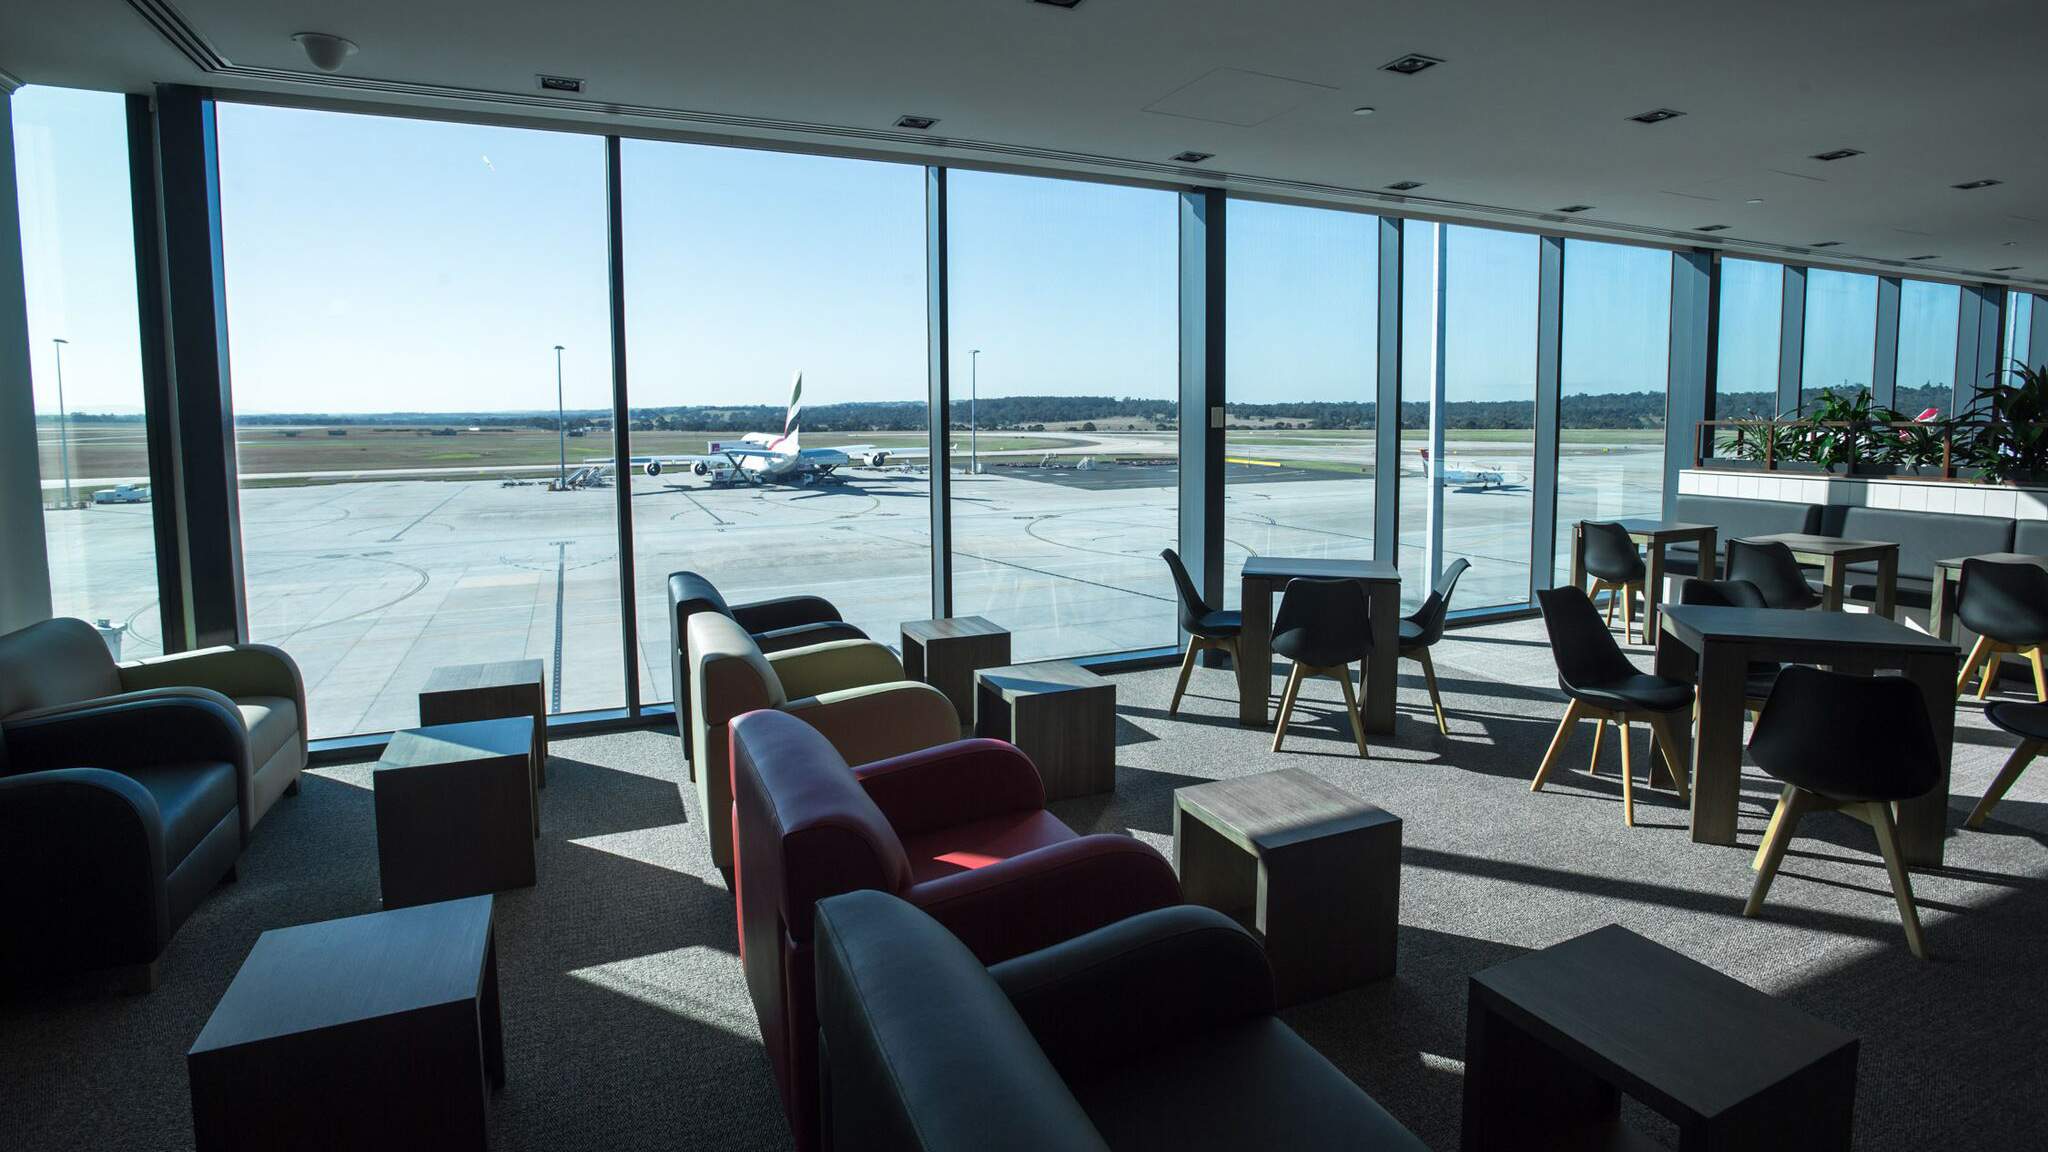 Melbourne Airport Now Features a Pay-As-You-Go Lounge That Anyone Can Use